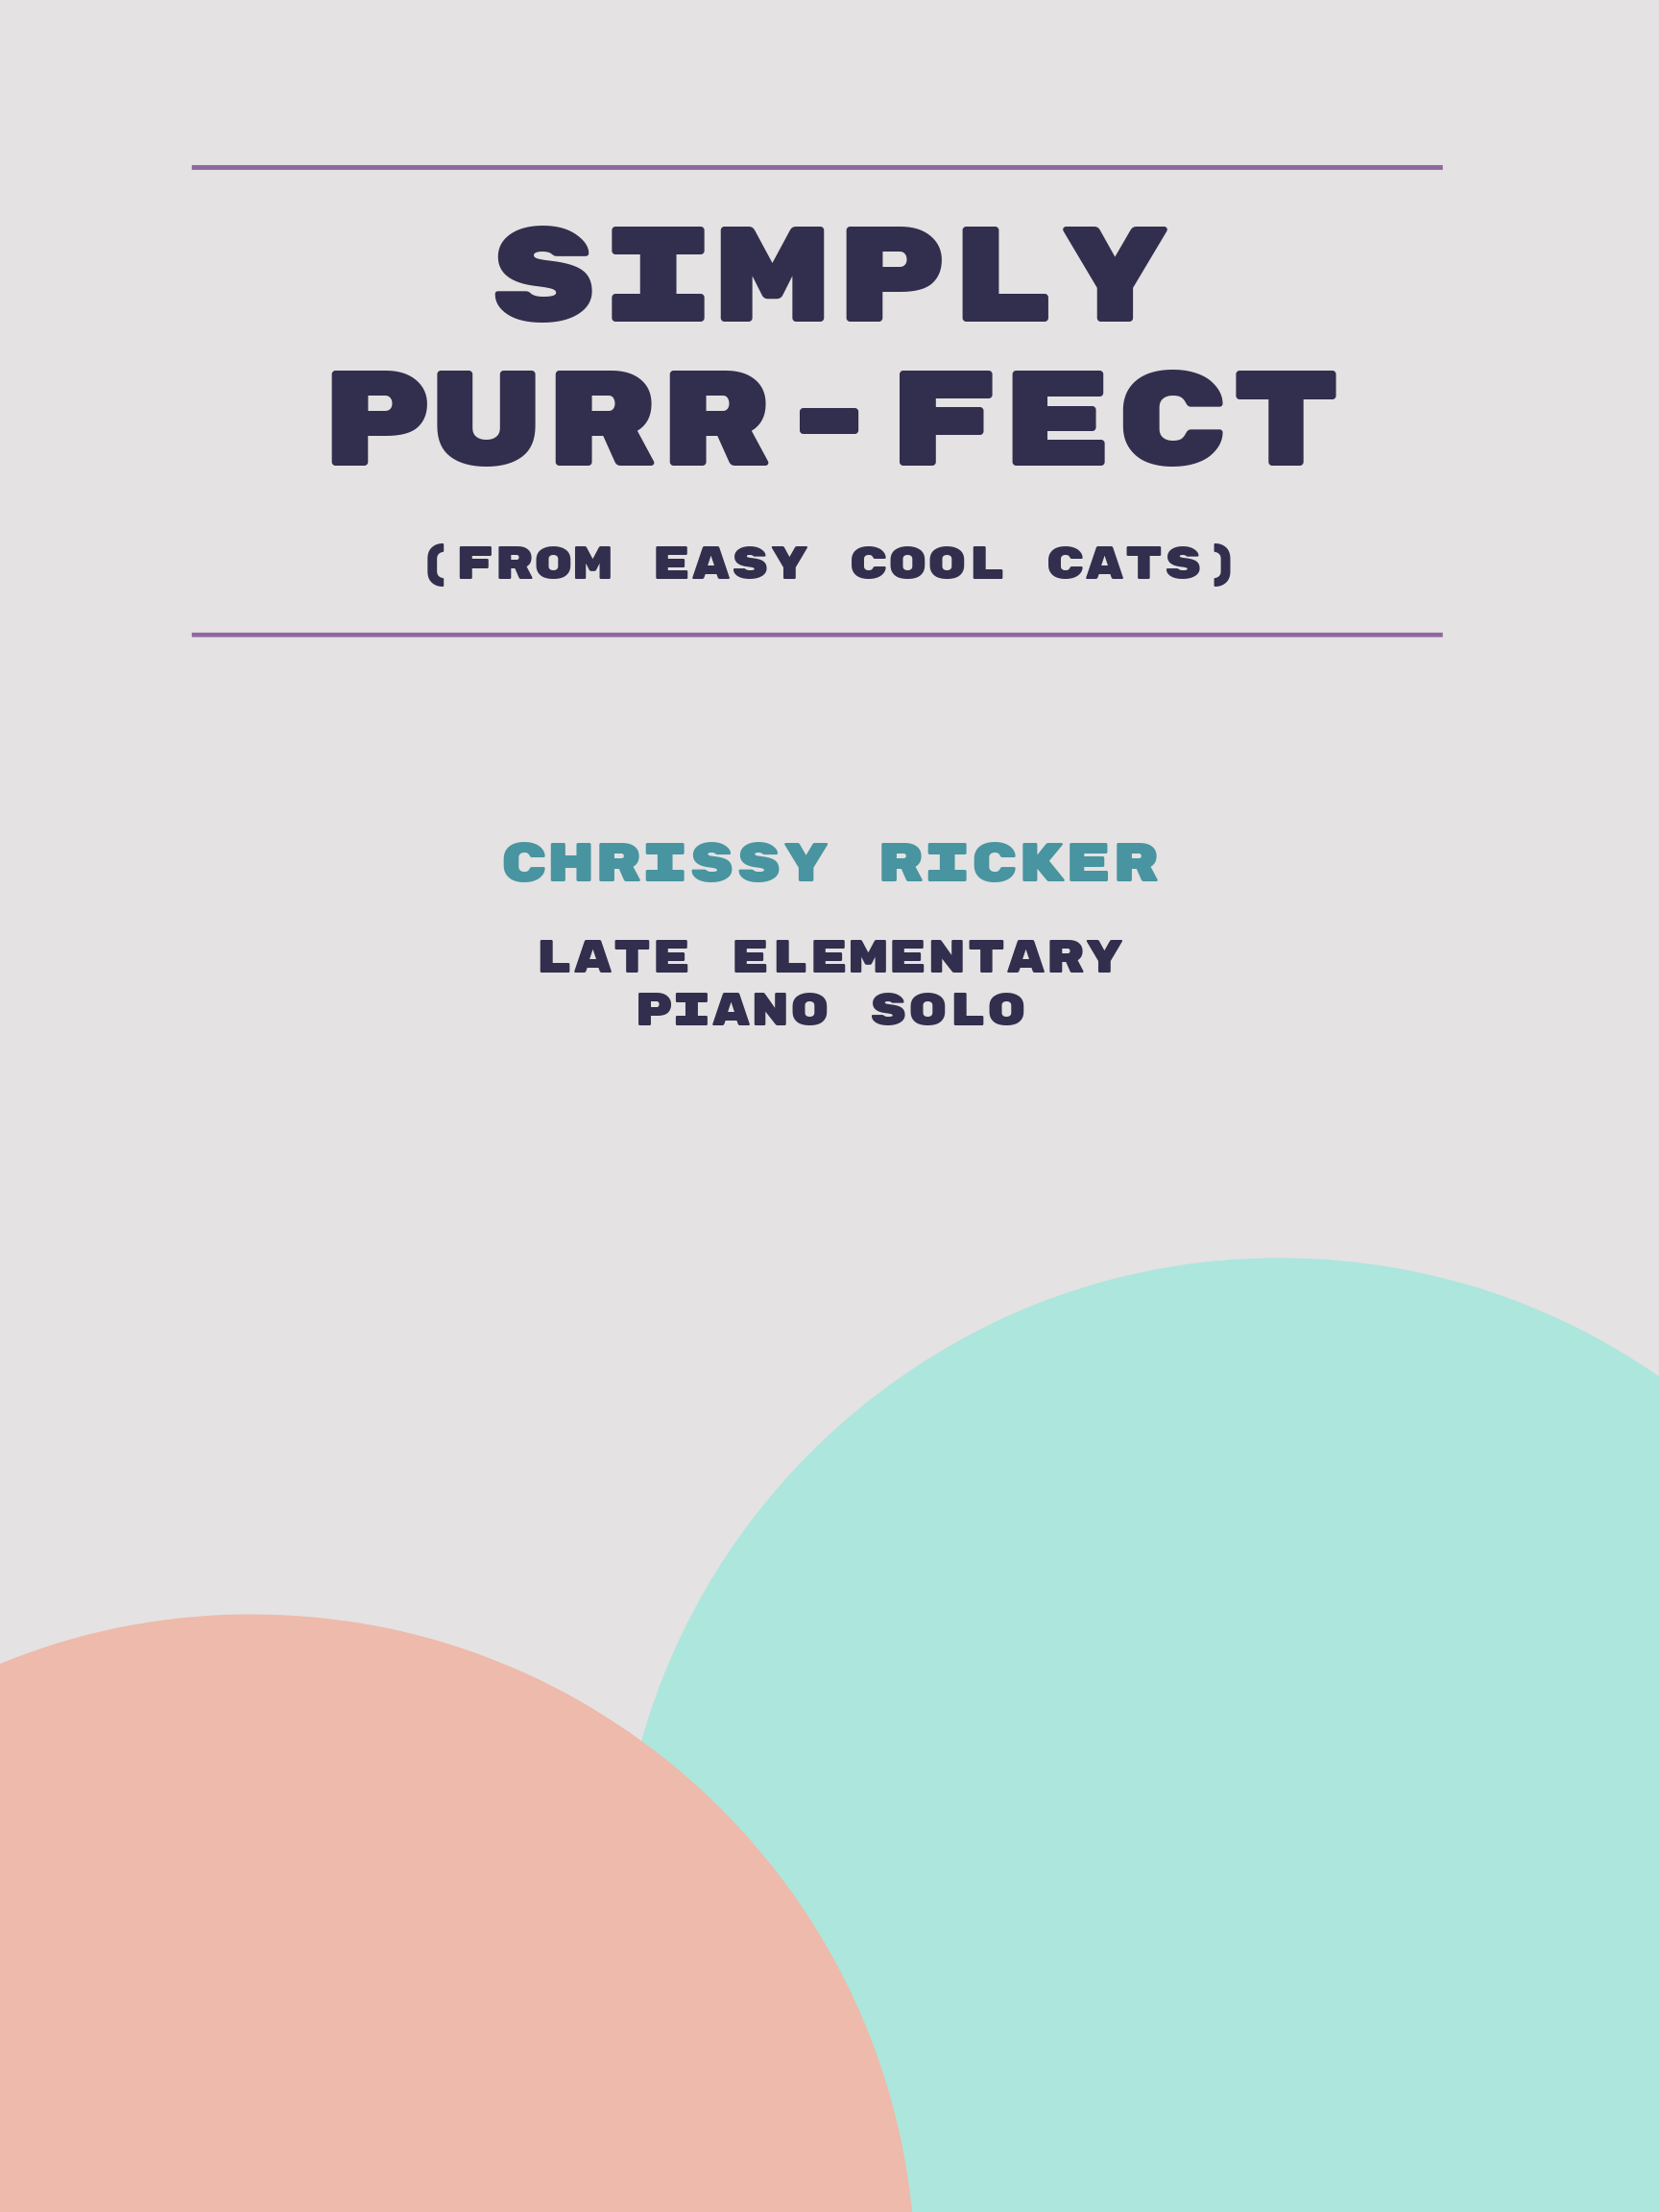 Simply Purr-fect by Chrissy Ricker